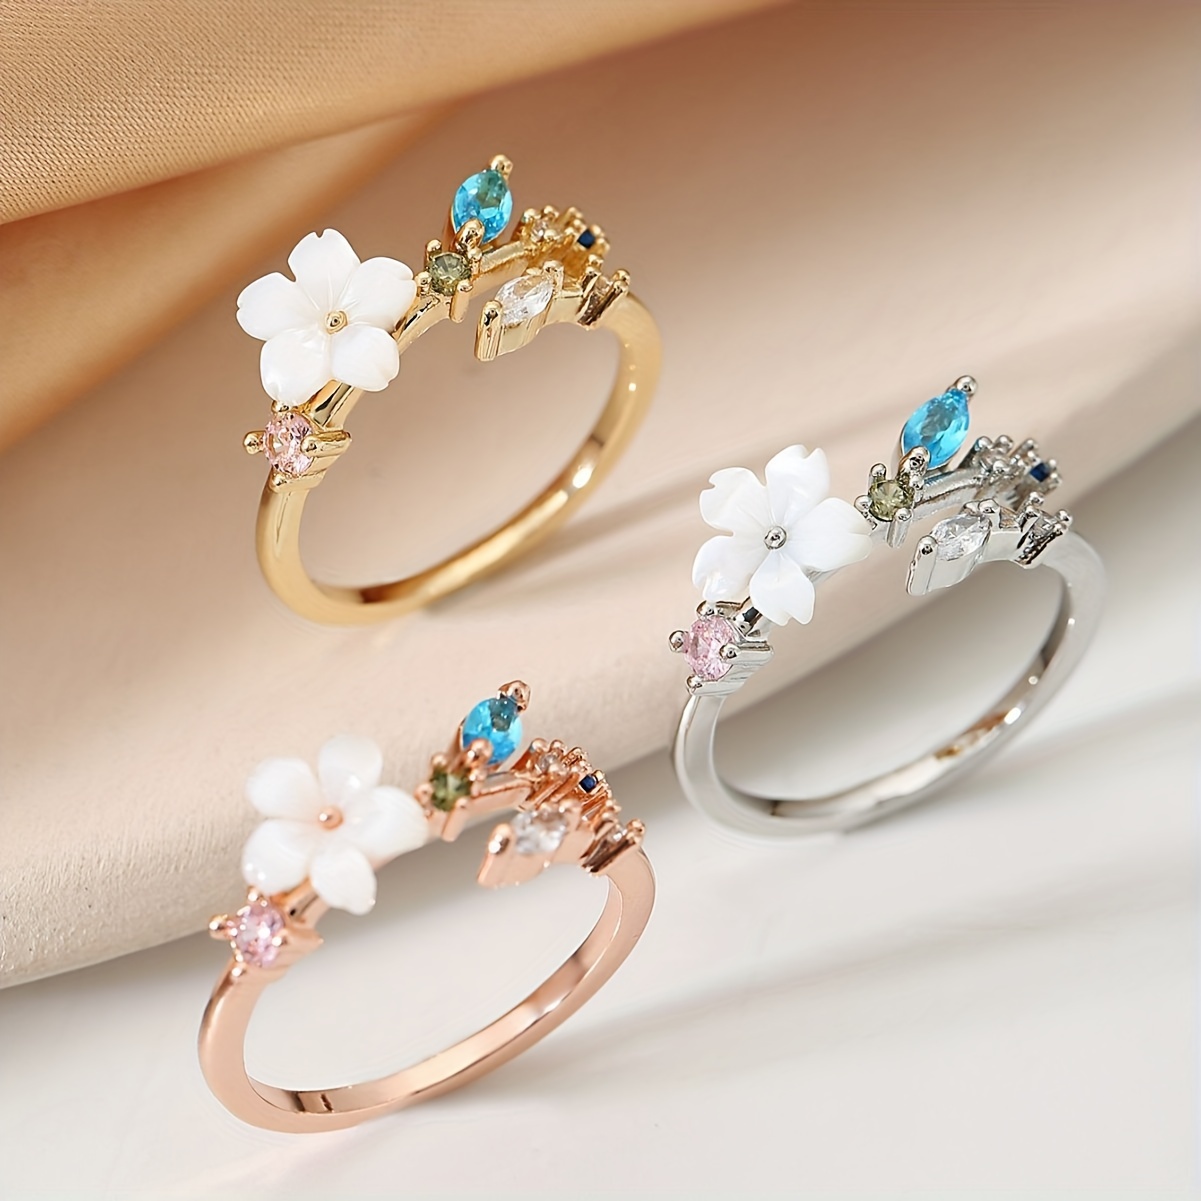 Fashionable Star Shaped Flower Blossom Ring Open Ring